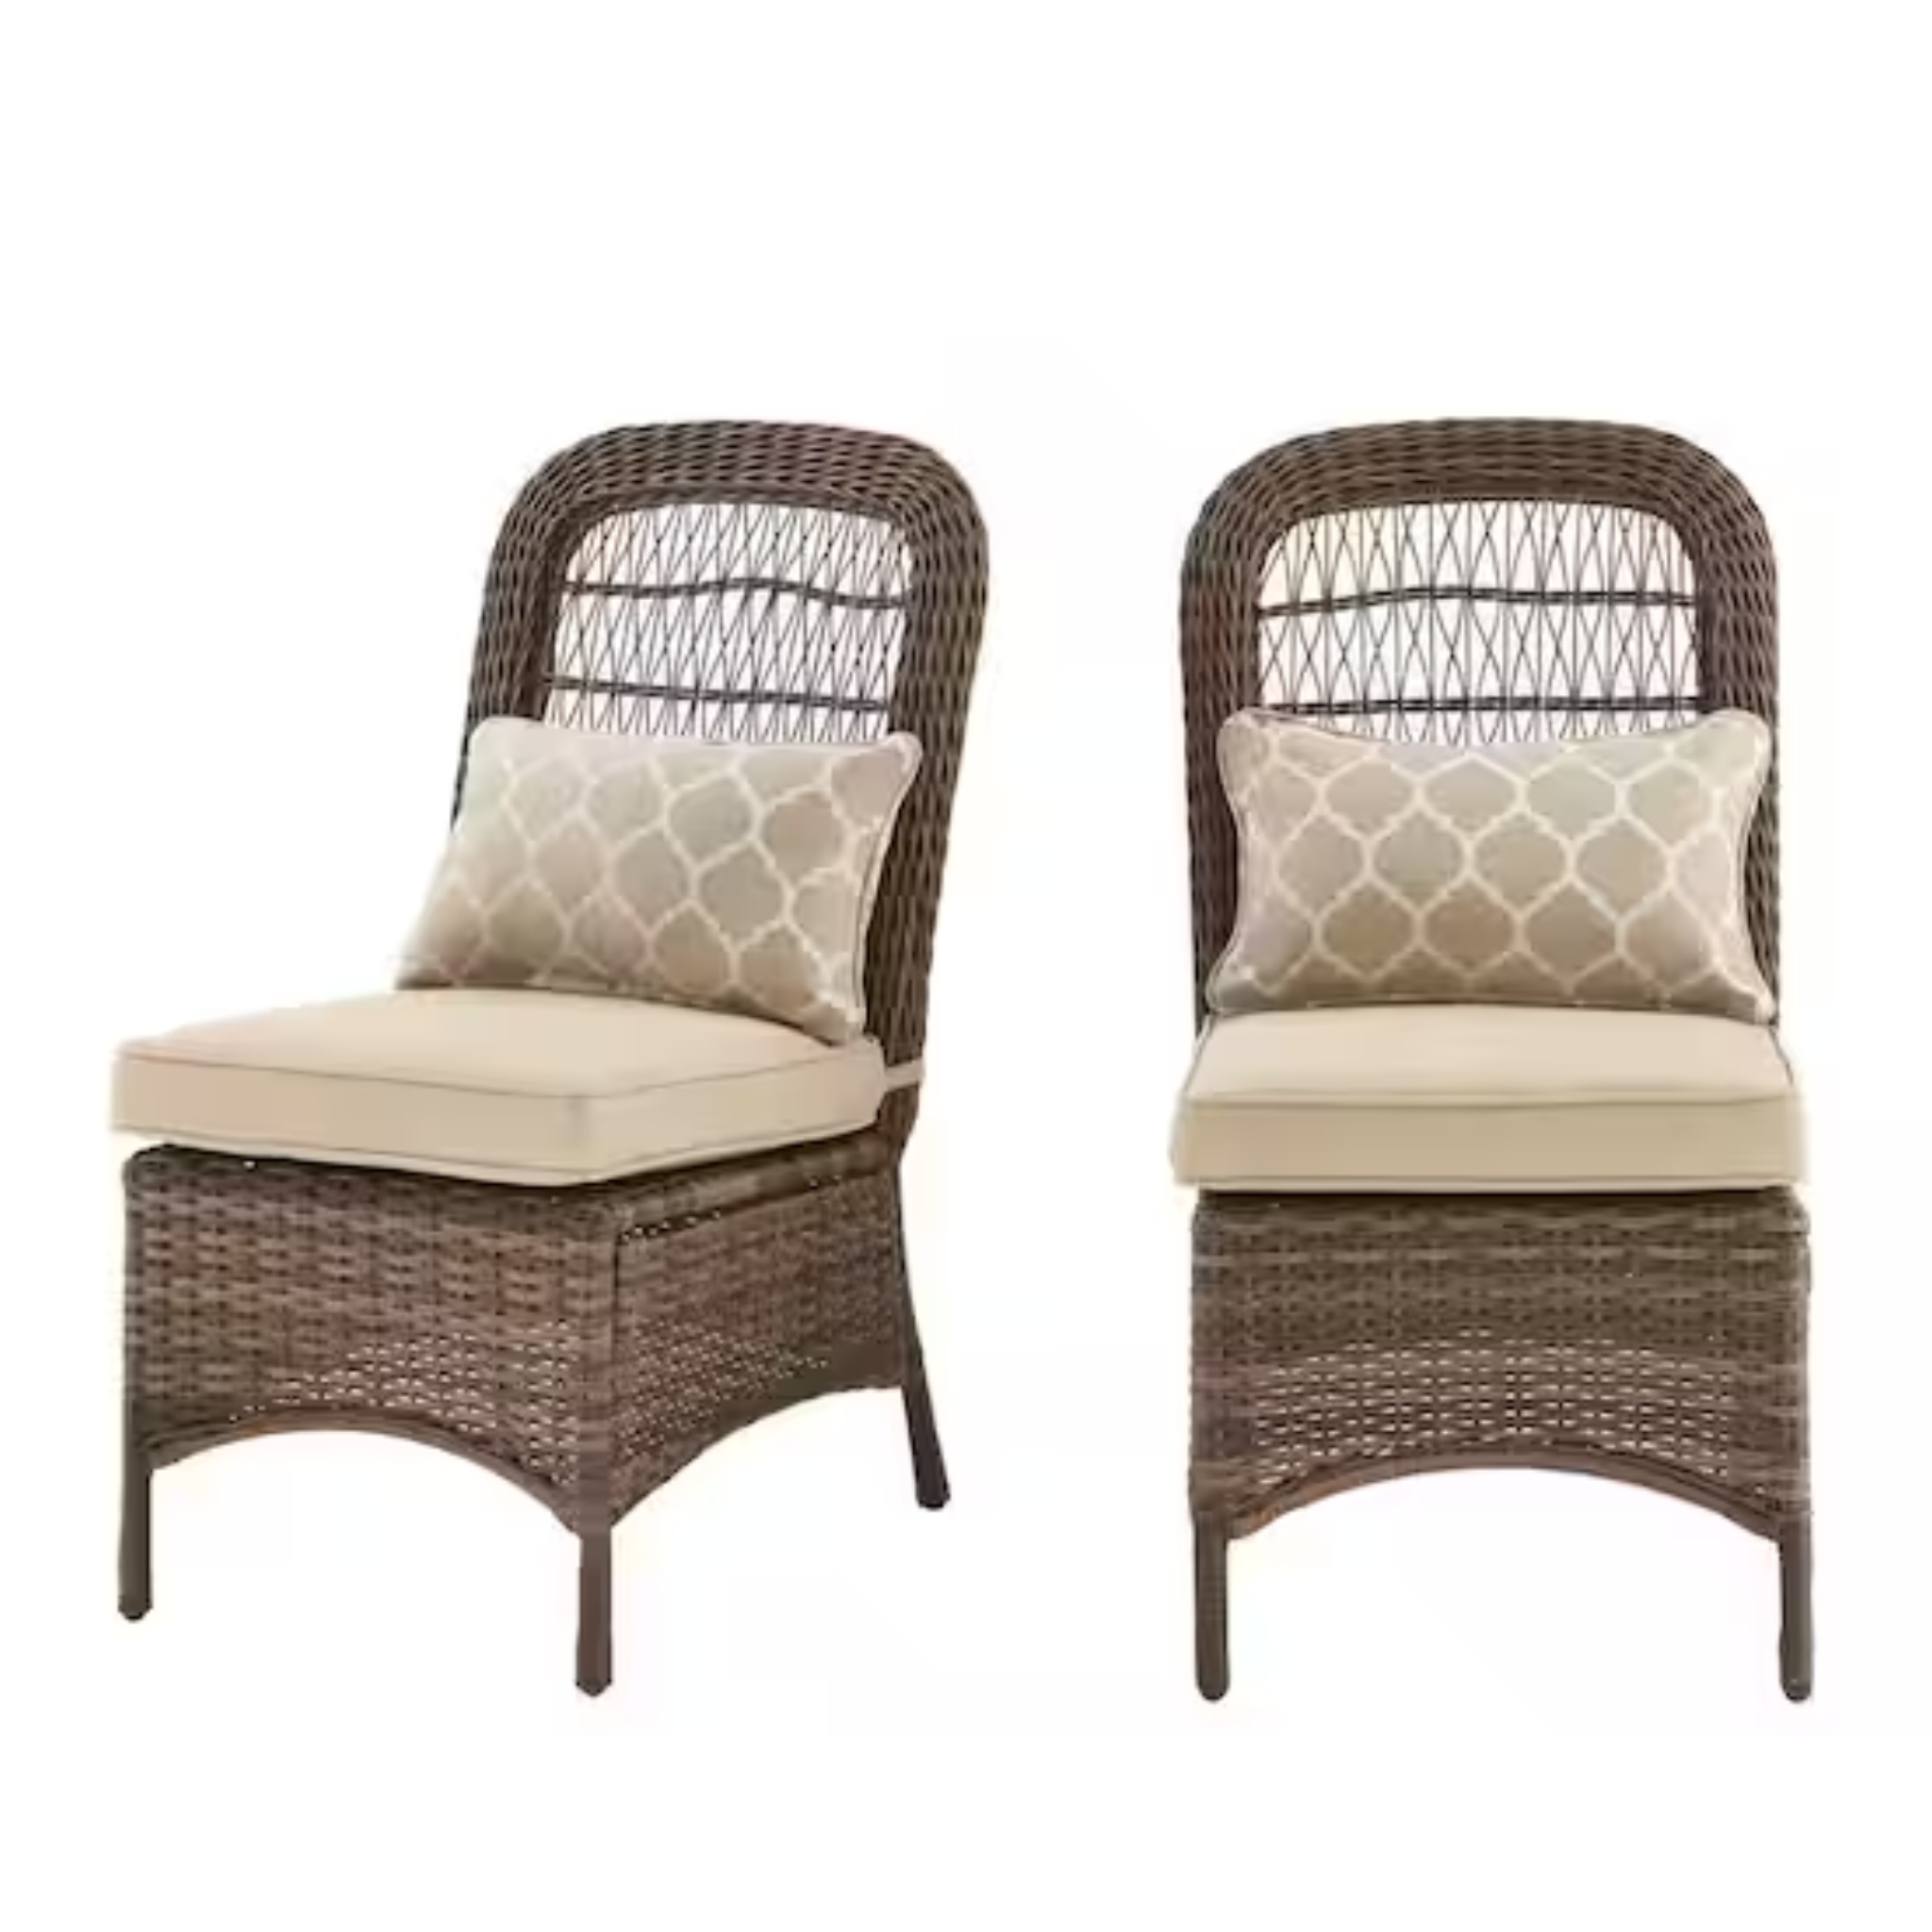 2-Pack Hampton Bay Beacon Park Brown Wicker Outdoor Patio Armless Dining Chairs